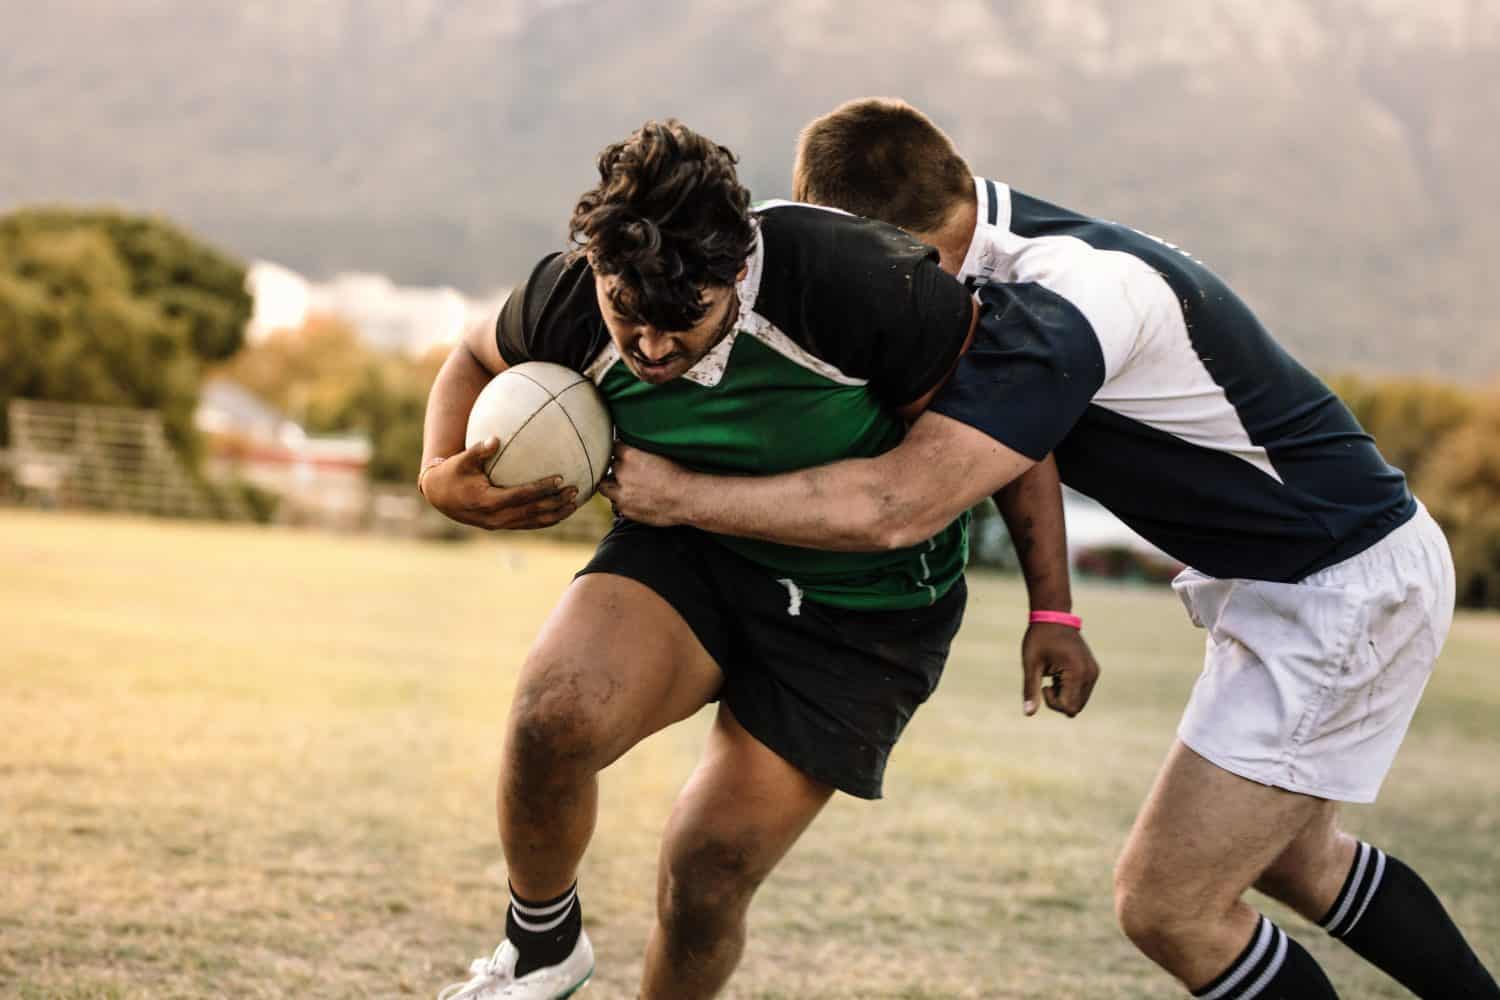 Professional rugby players striving to get the ball during the game. Rugby player with ball is blocked by the opposite team player at ground.